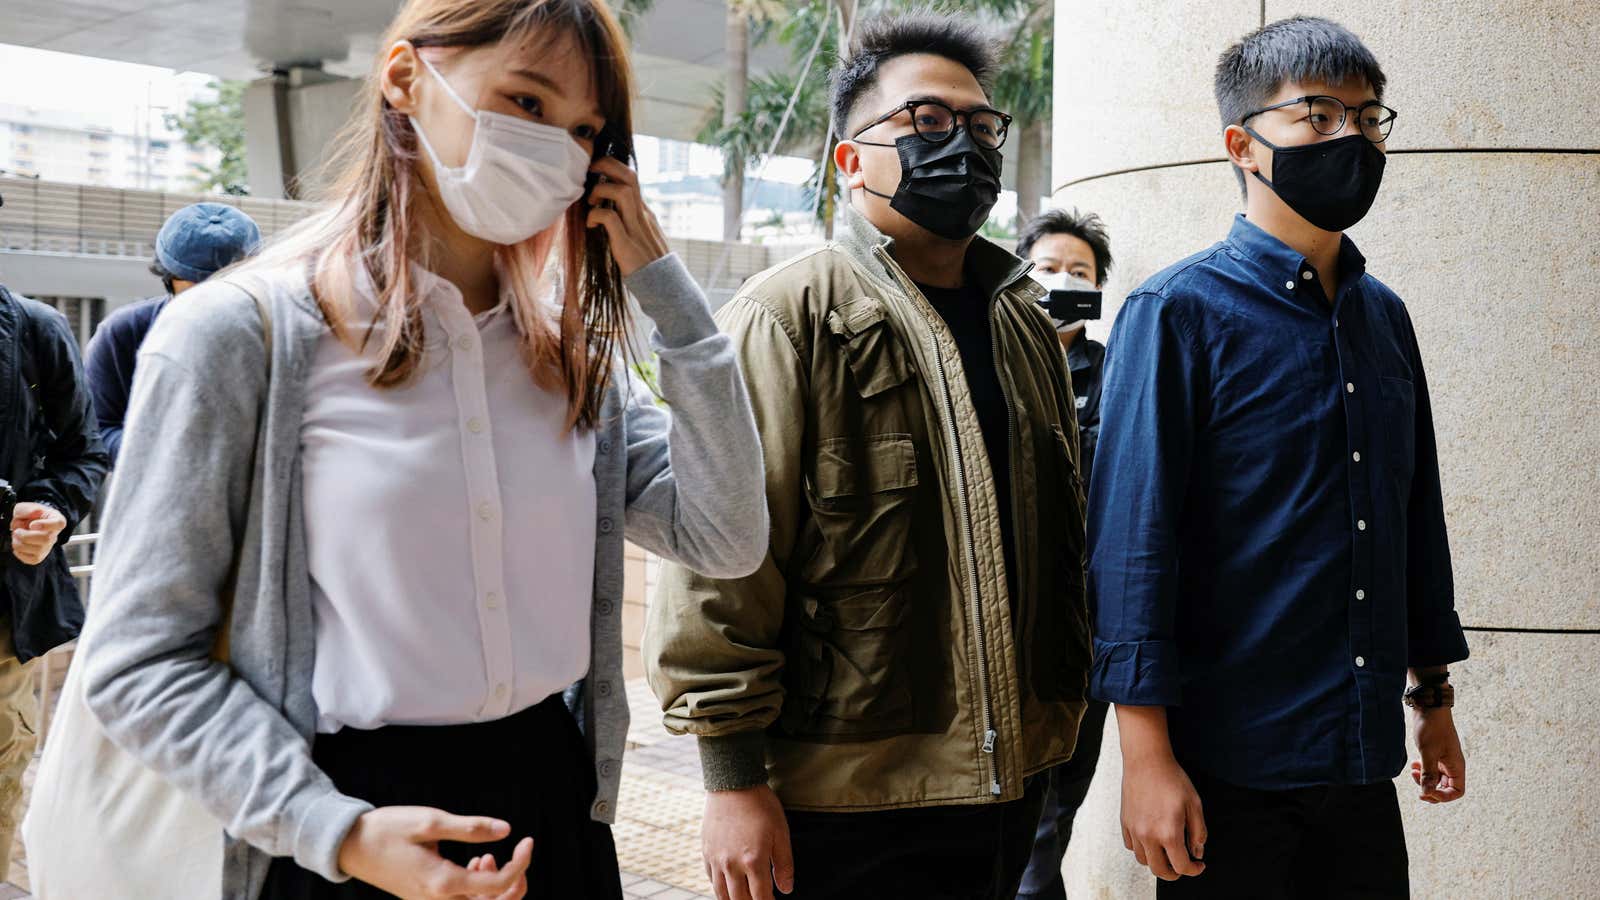 Pro-democracy activists Ivan Lam, Joshua Wong and Agnes Chow arrive at the West Kowloon Magistrates’ Courts to face charges related to illegal assembly stemming from…